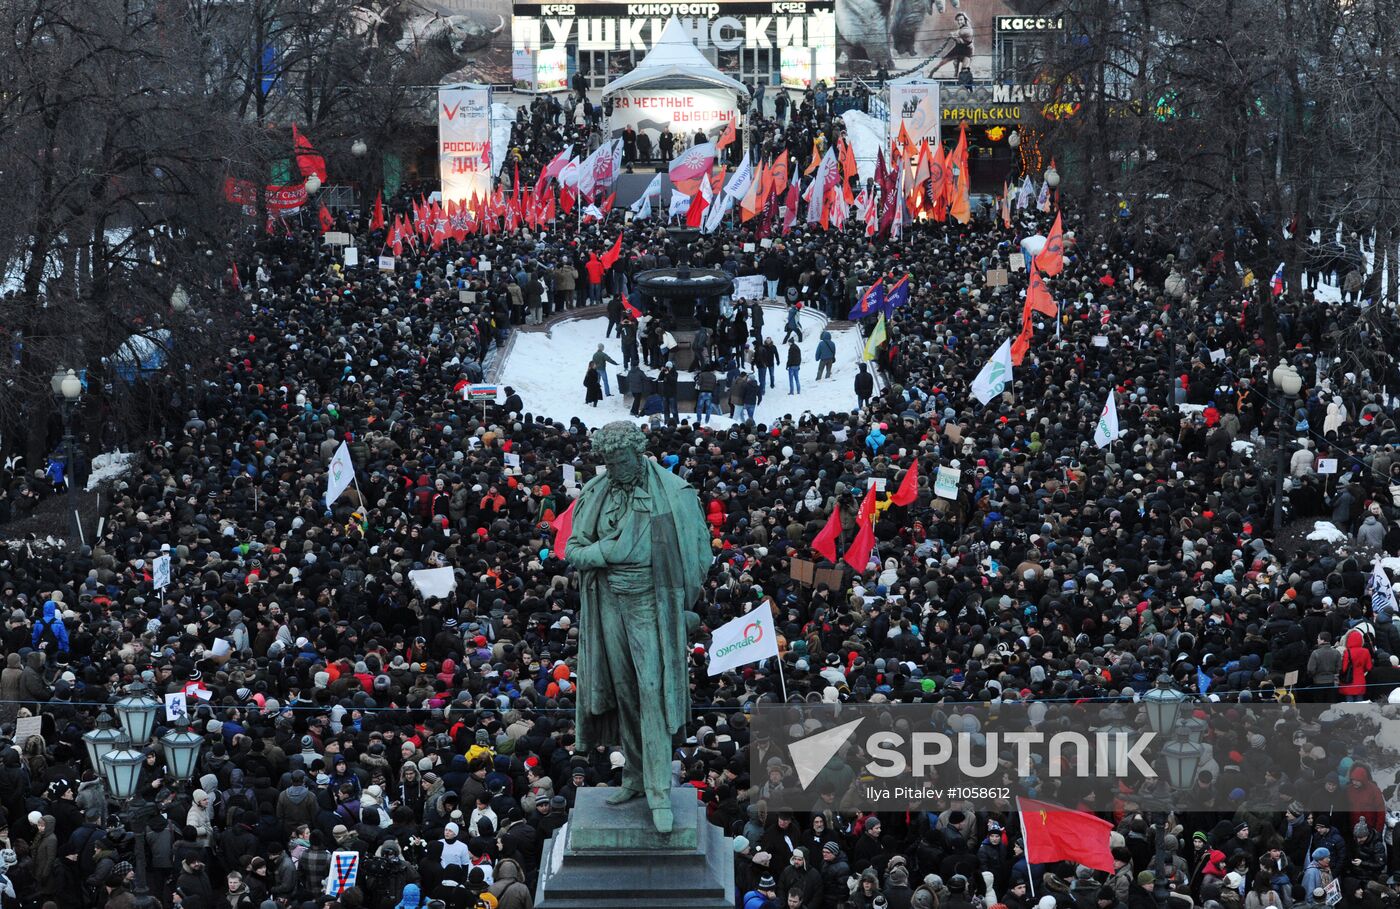 "For Fair Elections" rally in Moscow's Pushkin Square